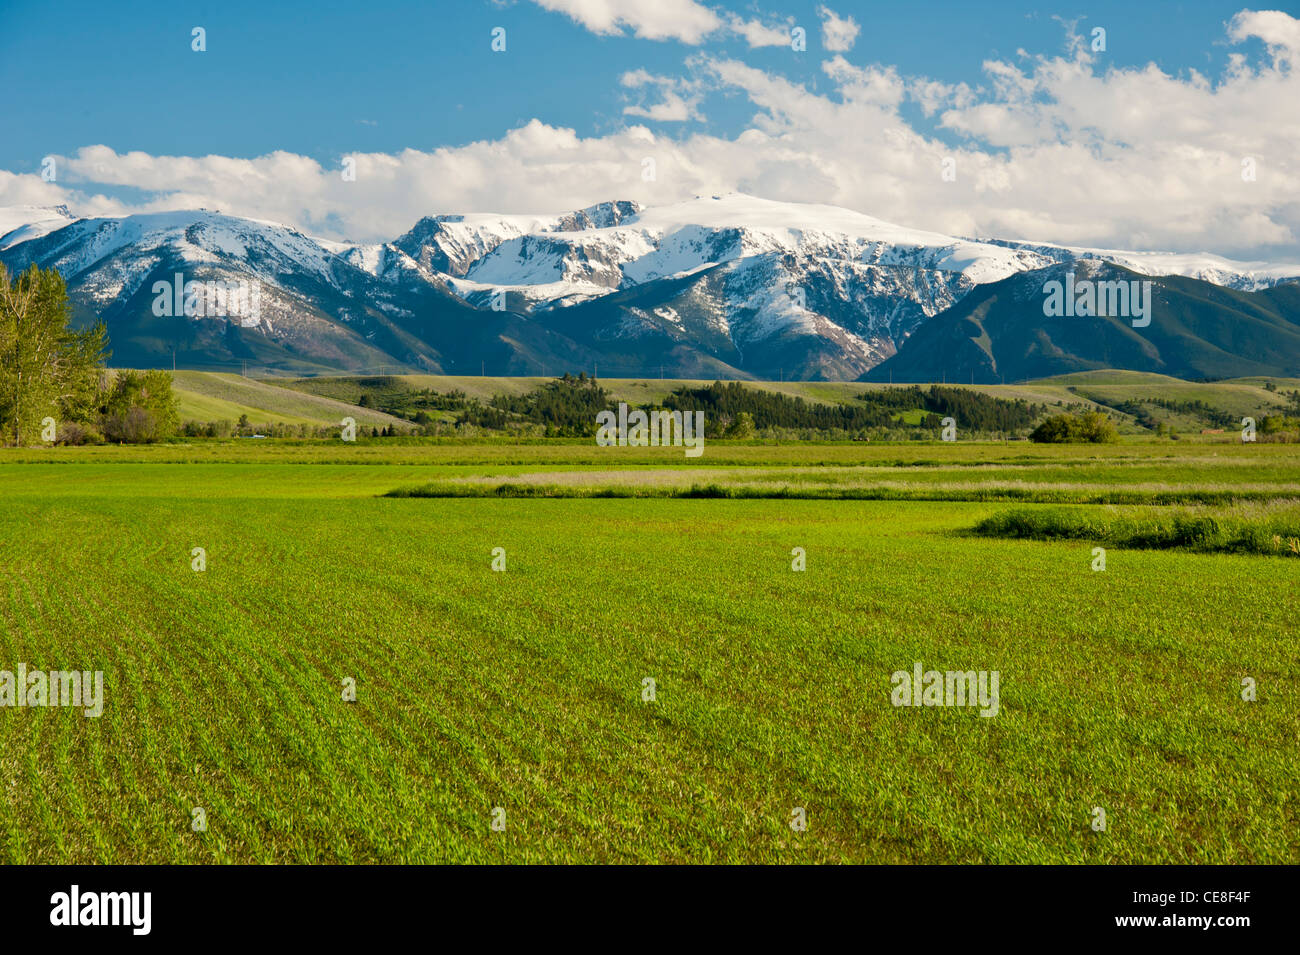 Montana’s Beartooth Mountains are seen in the distance from the Stillwater River valley. Stock Photo